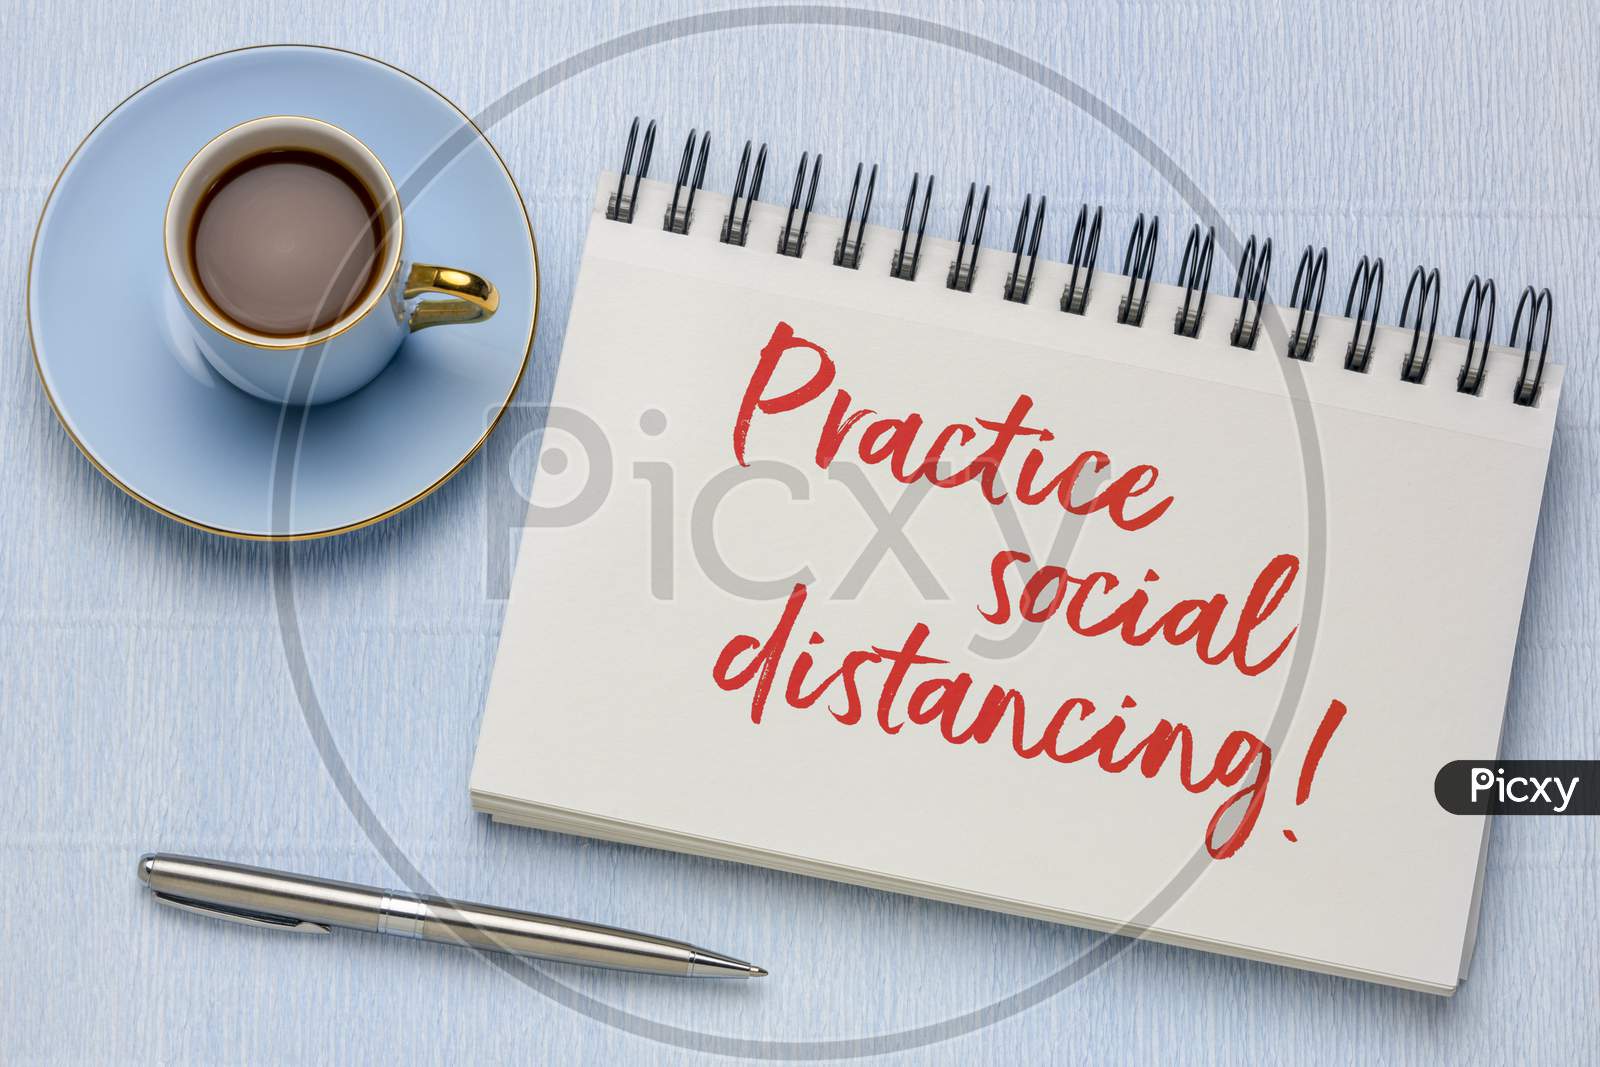 Practice Social Distancing Advice Or Reminder - Handwriting In A Spiral Art Sketchbook With A Cup Of Coffee, Infection Control During Covid-19 Virus Pandemic